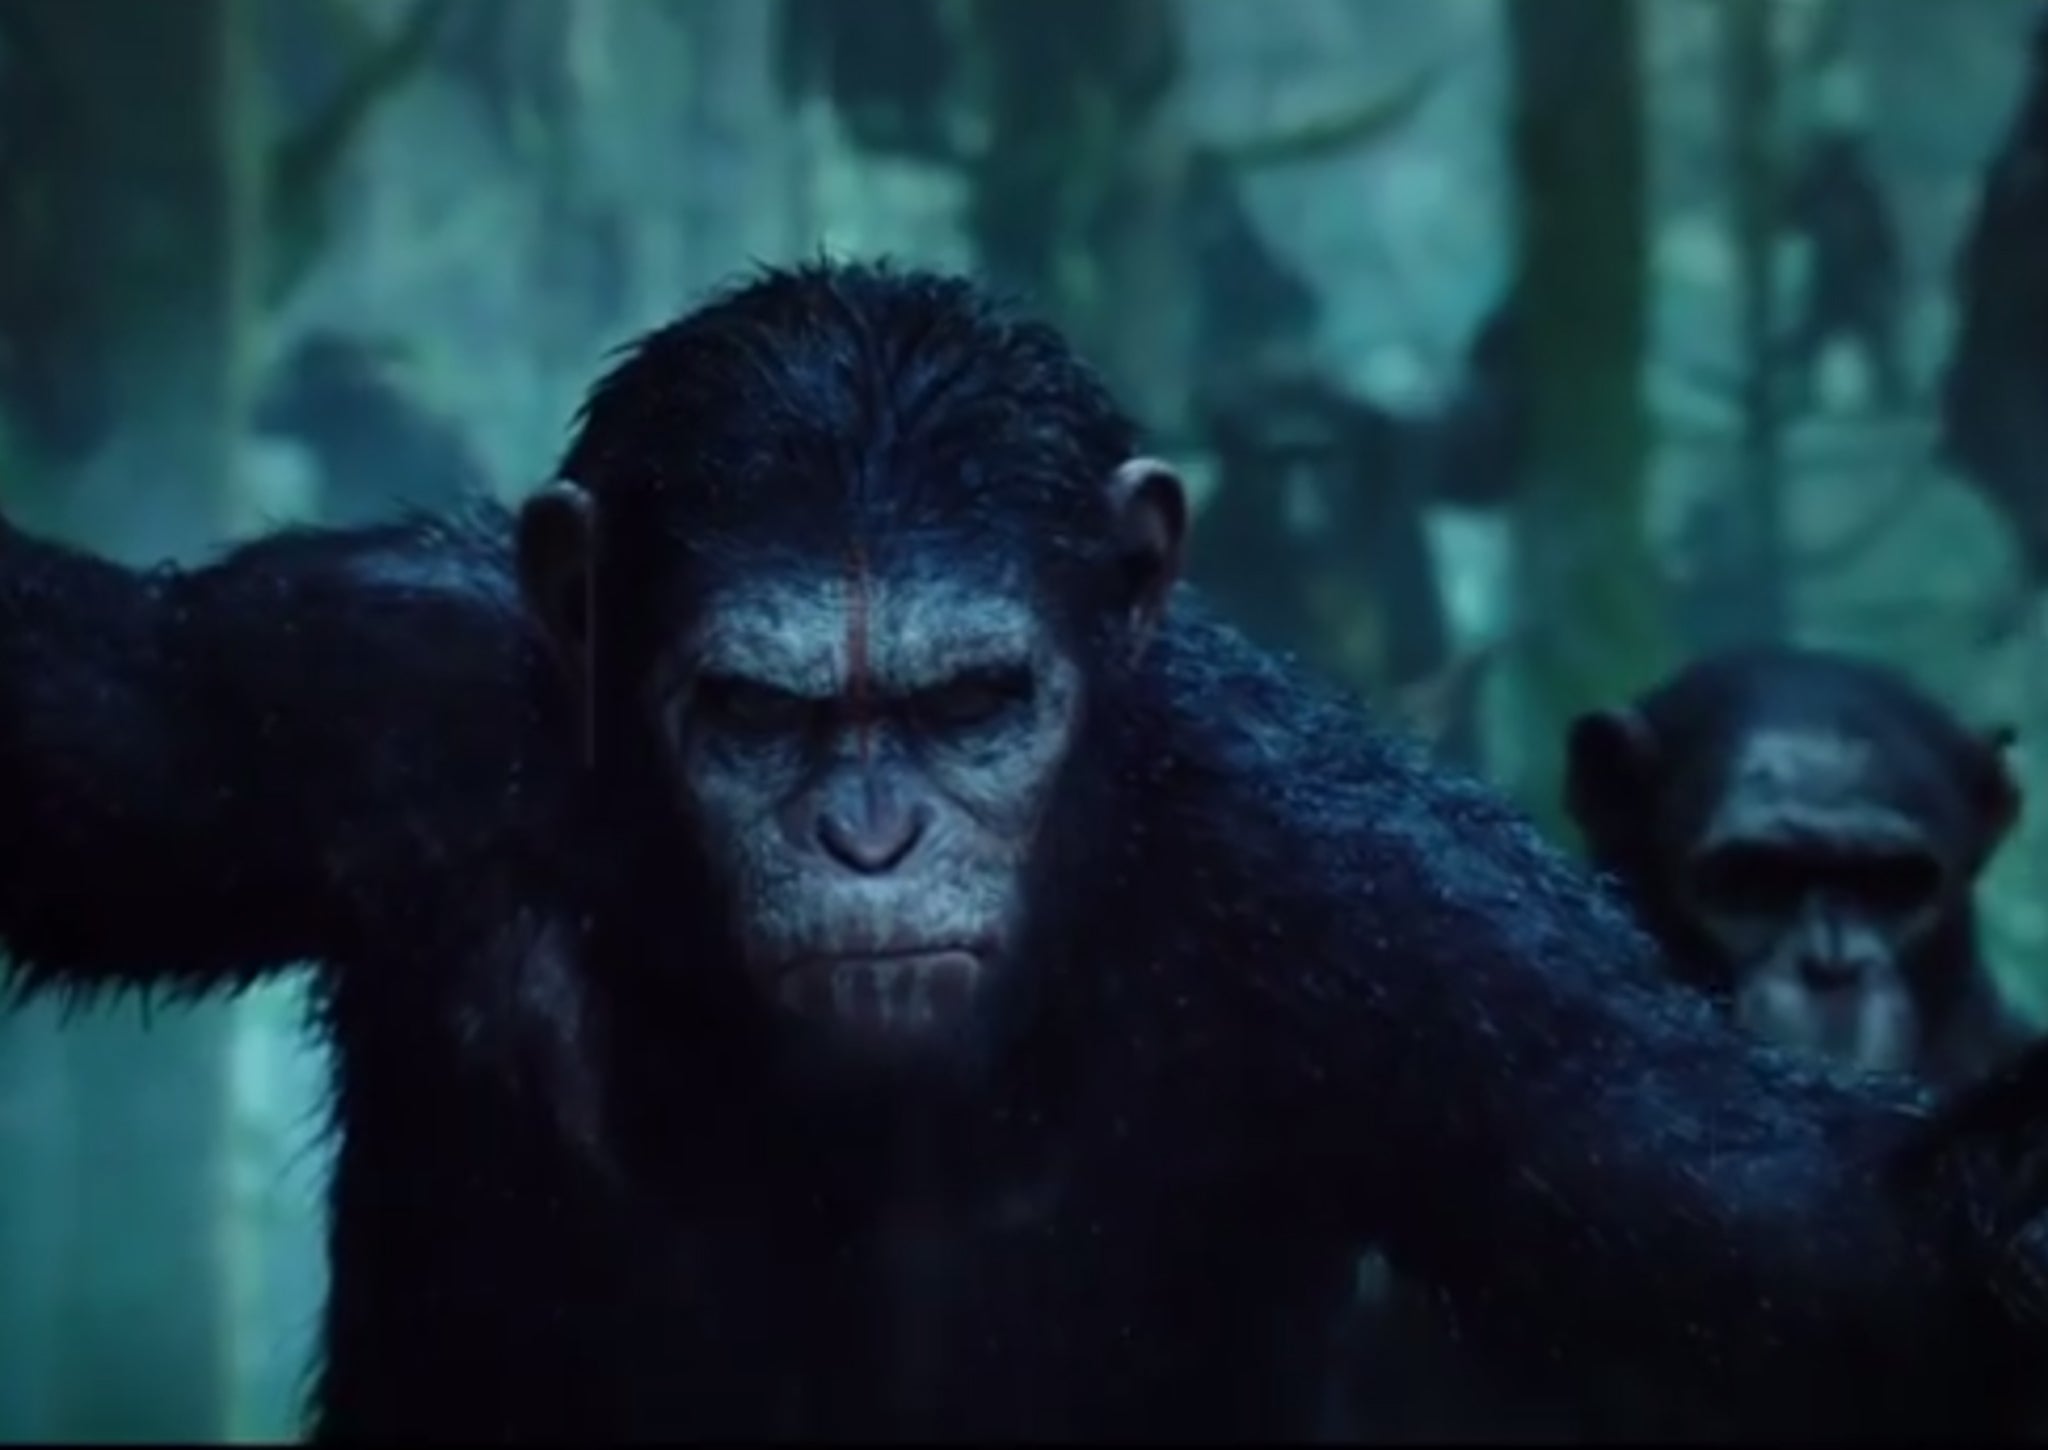 Monkey madness: Dawn of the Planet of the Apes